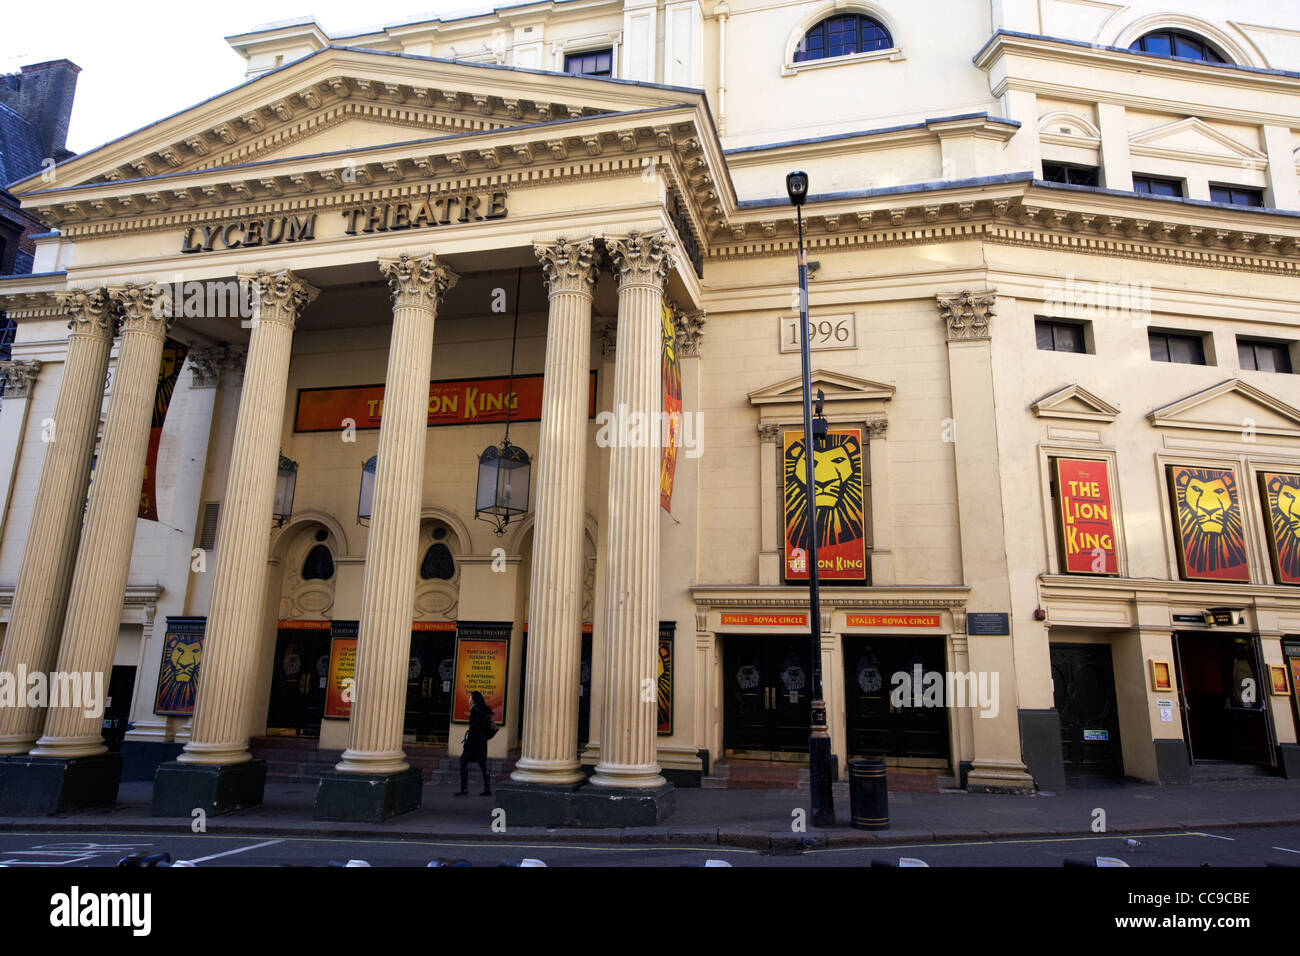 the lyceum theatre showing the lion king London England UK United kingdom Stock Photo